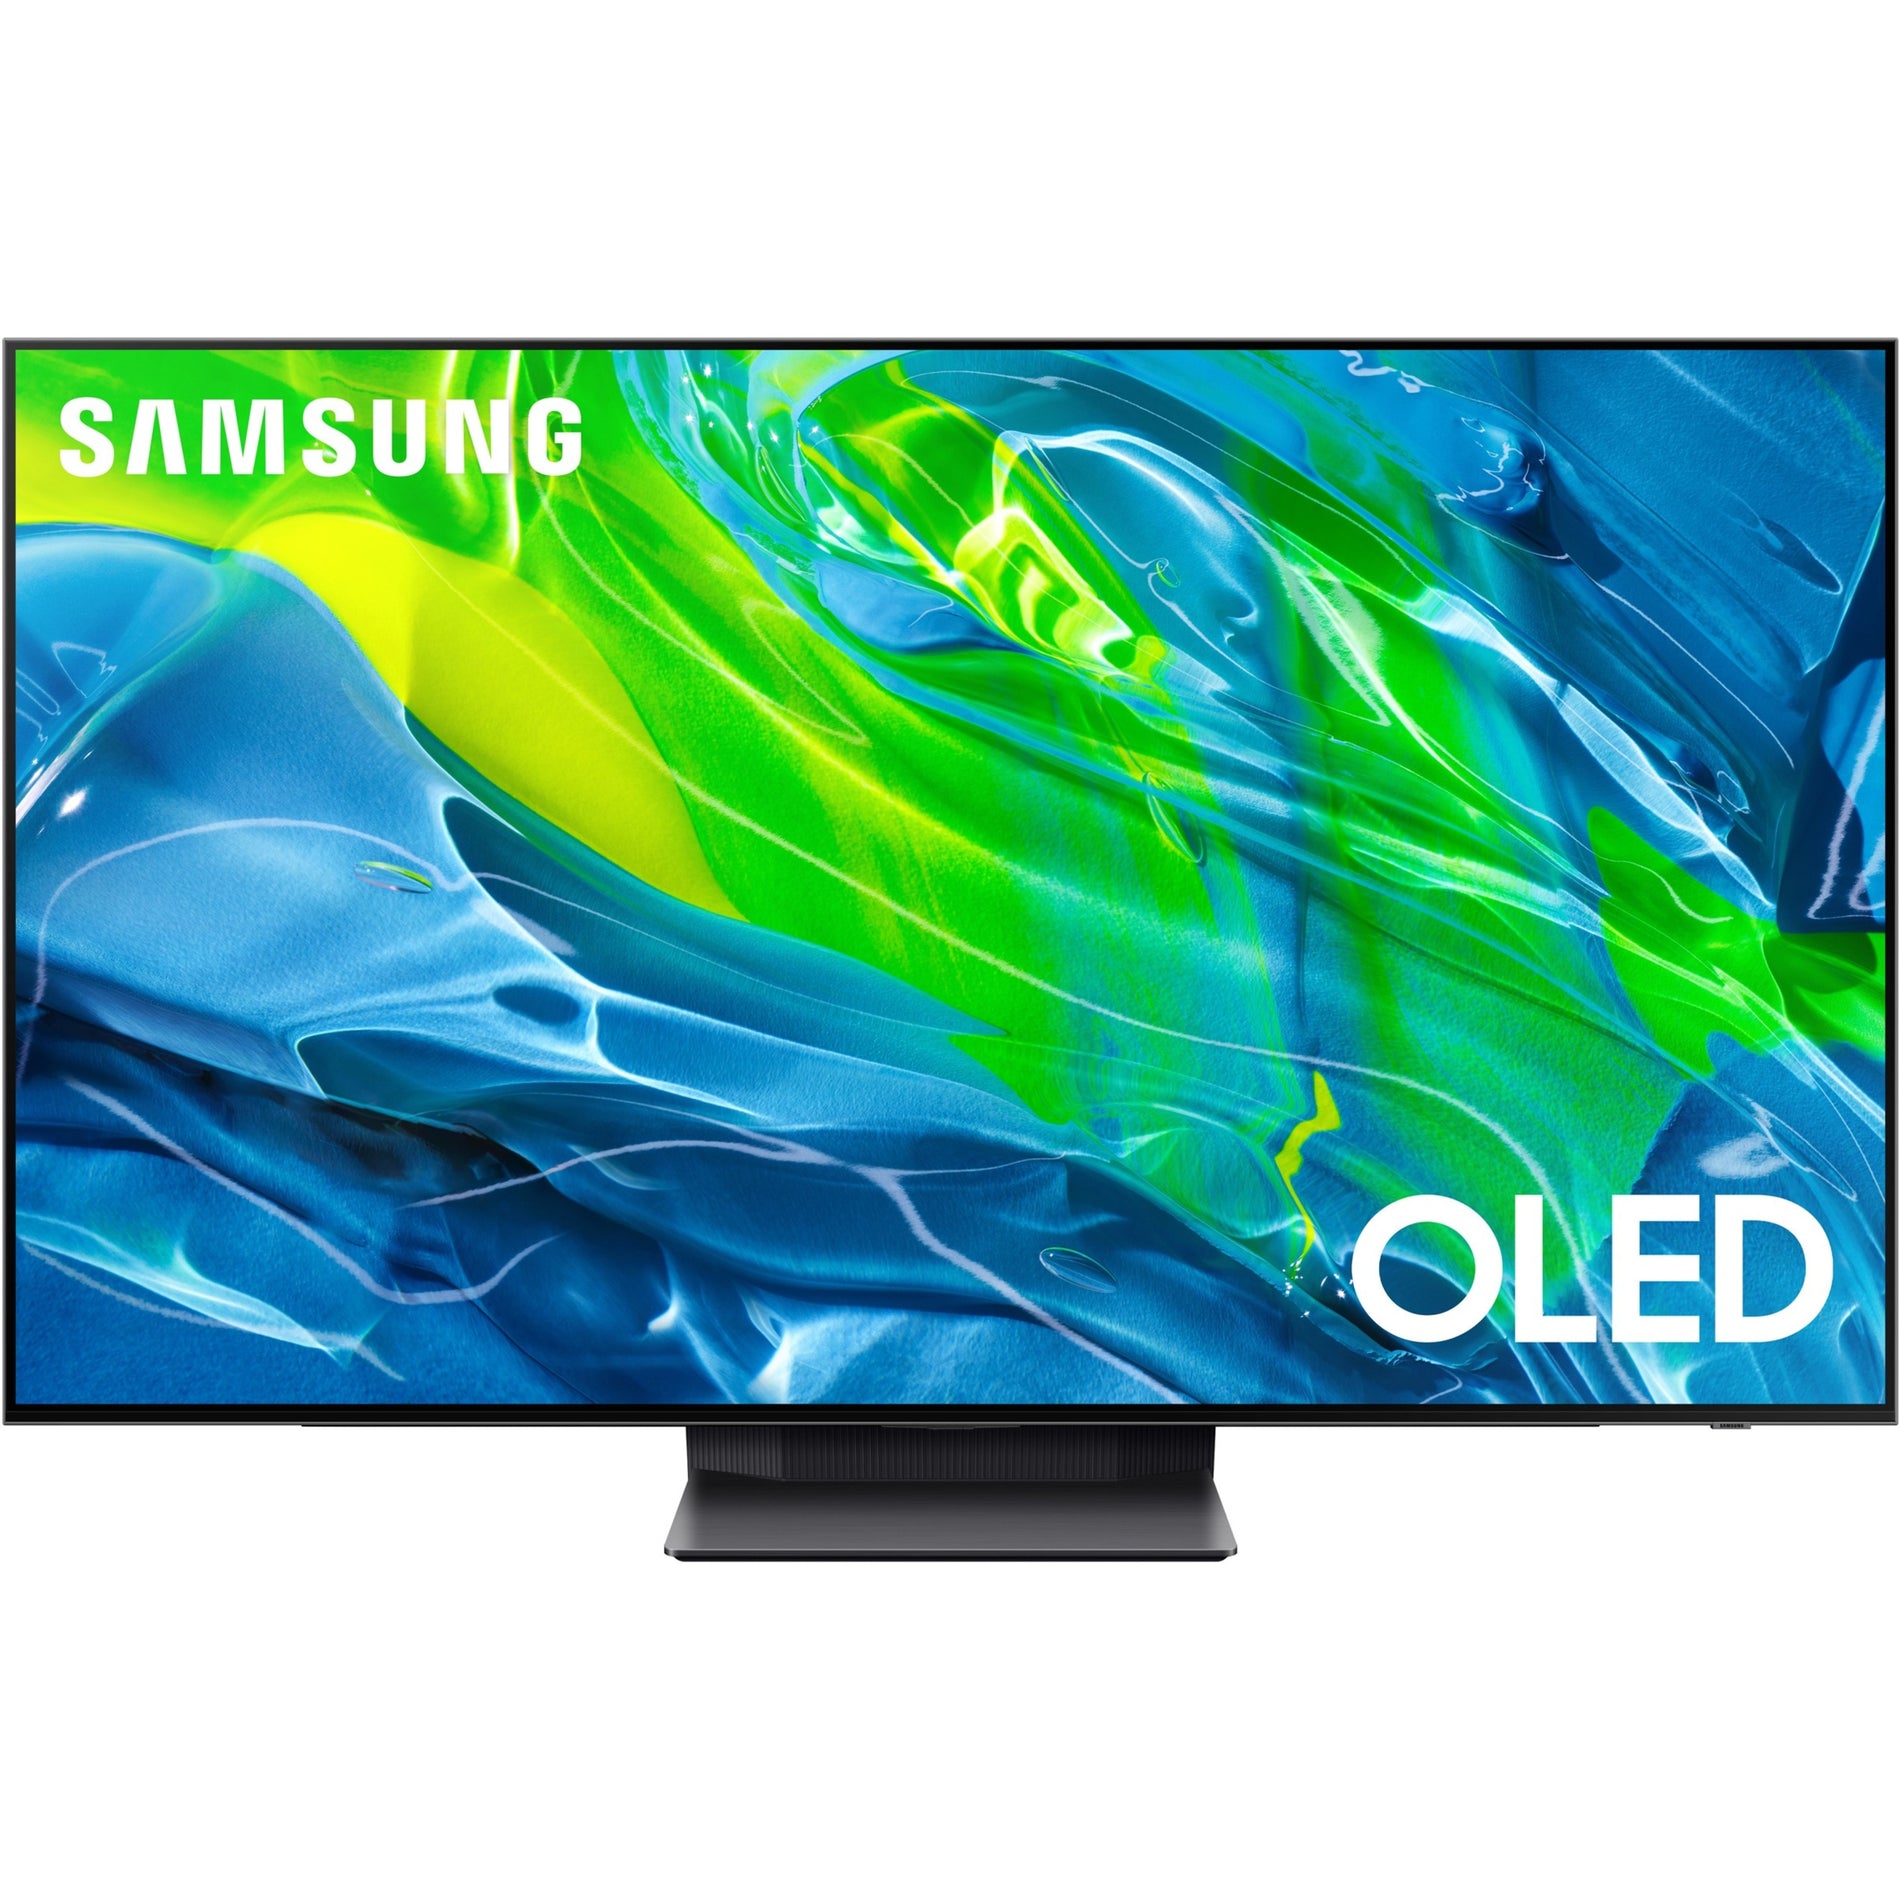 Samsung QN65S95BAFXZA 65" Class S95B OLED 4K Smart TV (2022), 120Hz, 4 HDMI Ports, Color Volume 100%, Neo Quantum Processor 4K with AI Upscaling, Object Tracking Sound, Ambient Mode +, SolarCell Remote